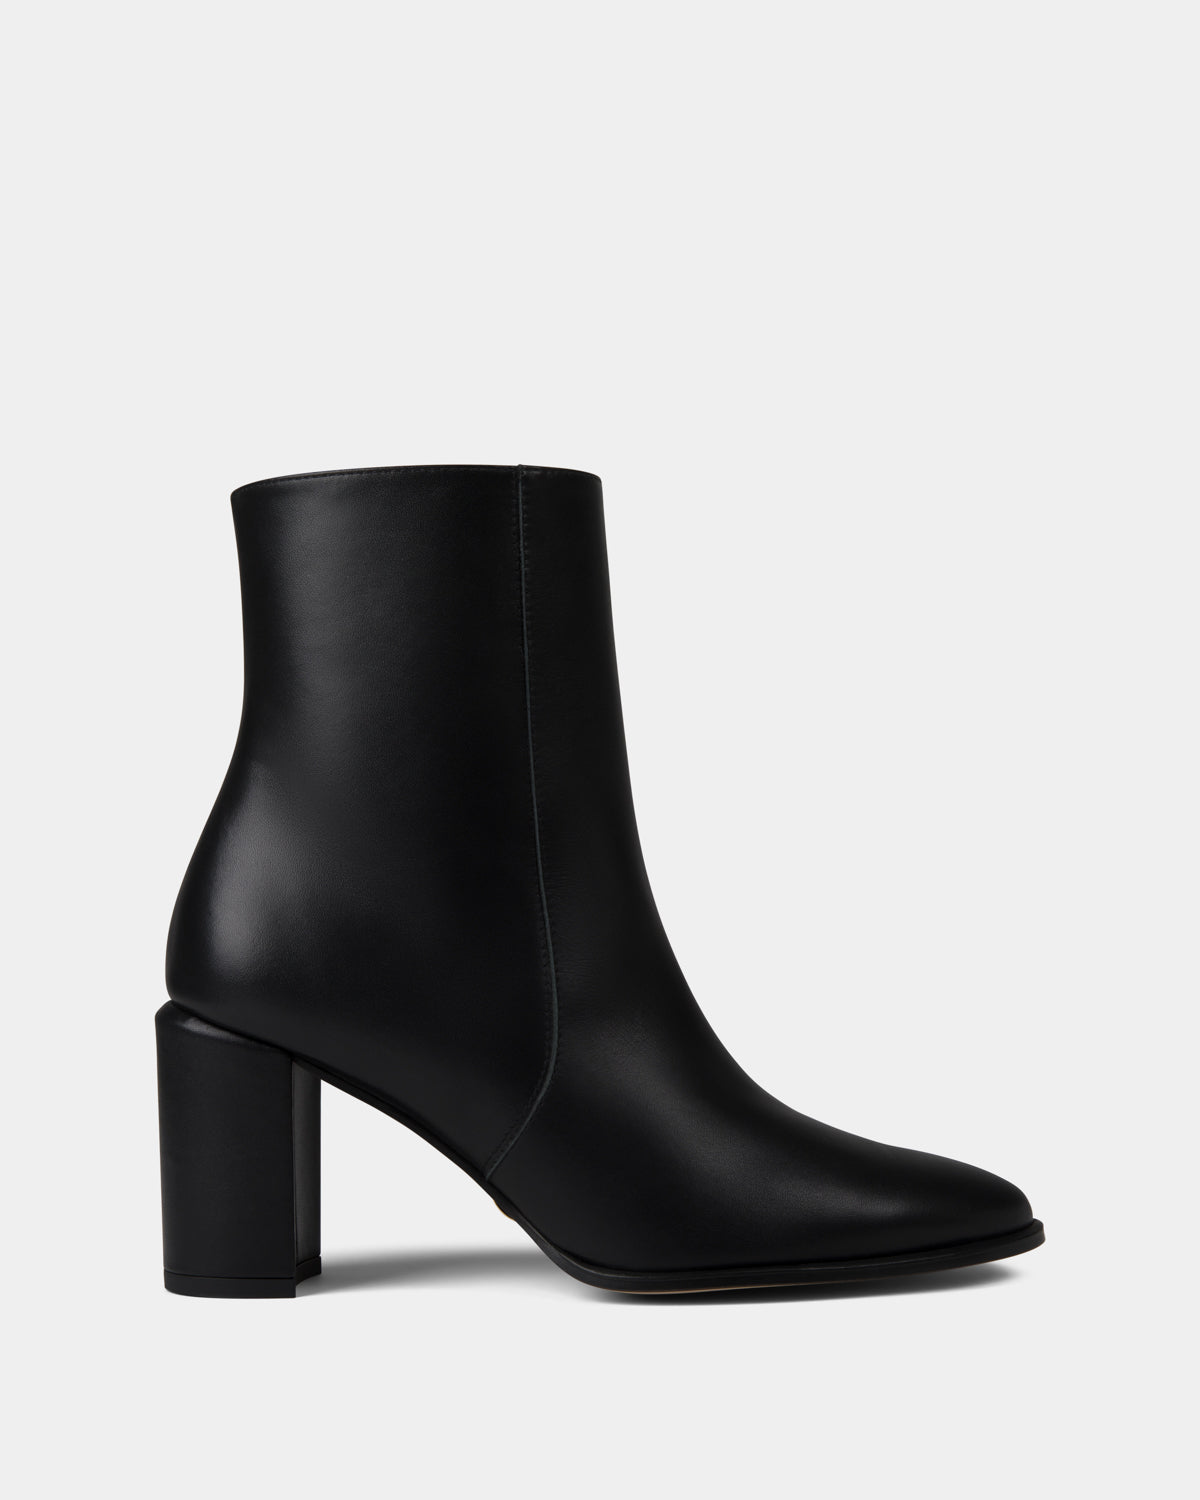 kallu-kallú-black-nappa-leather-shoes-for-women-made-in-spain-boots-ankle-boots-booties-low-cut-boots